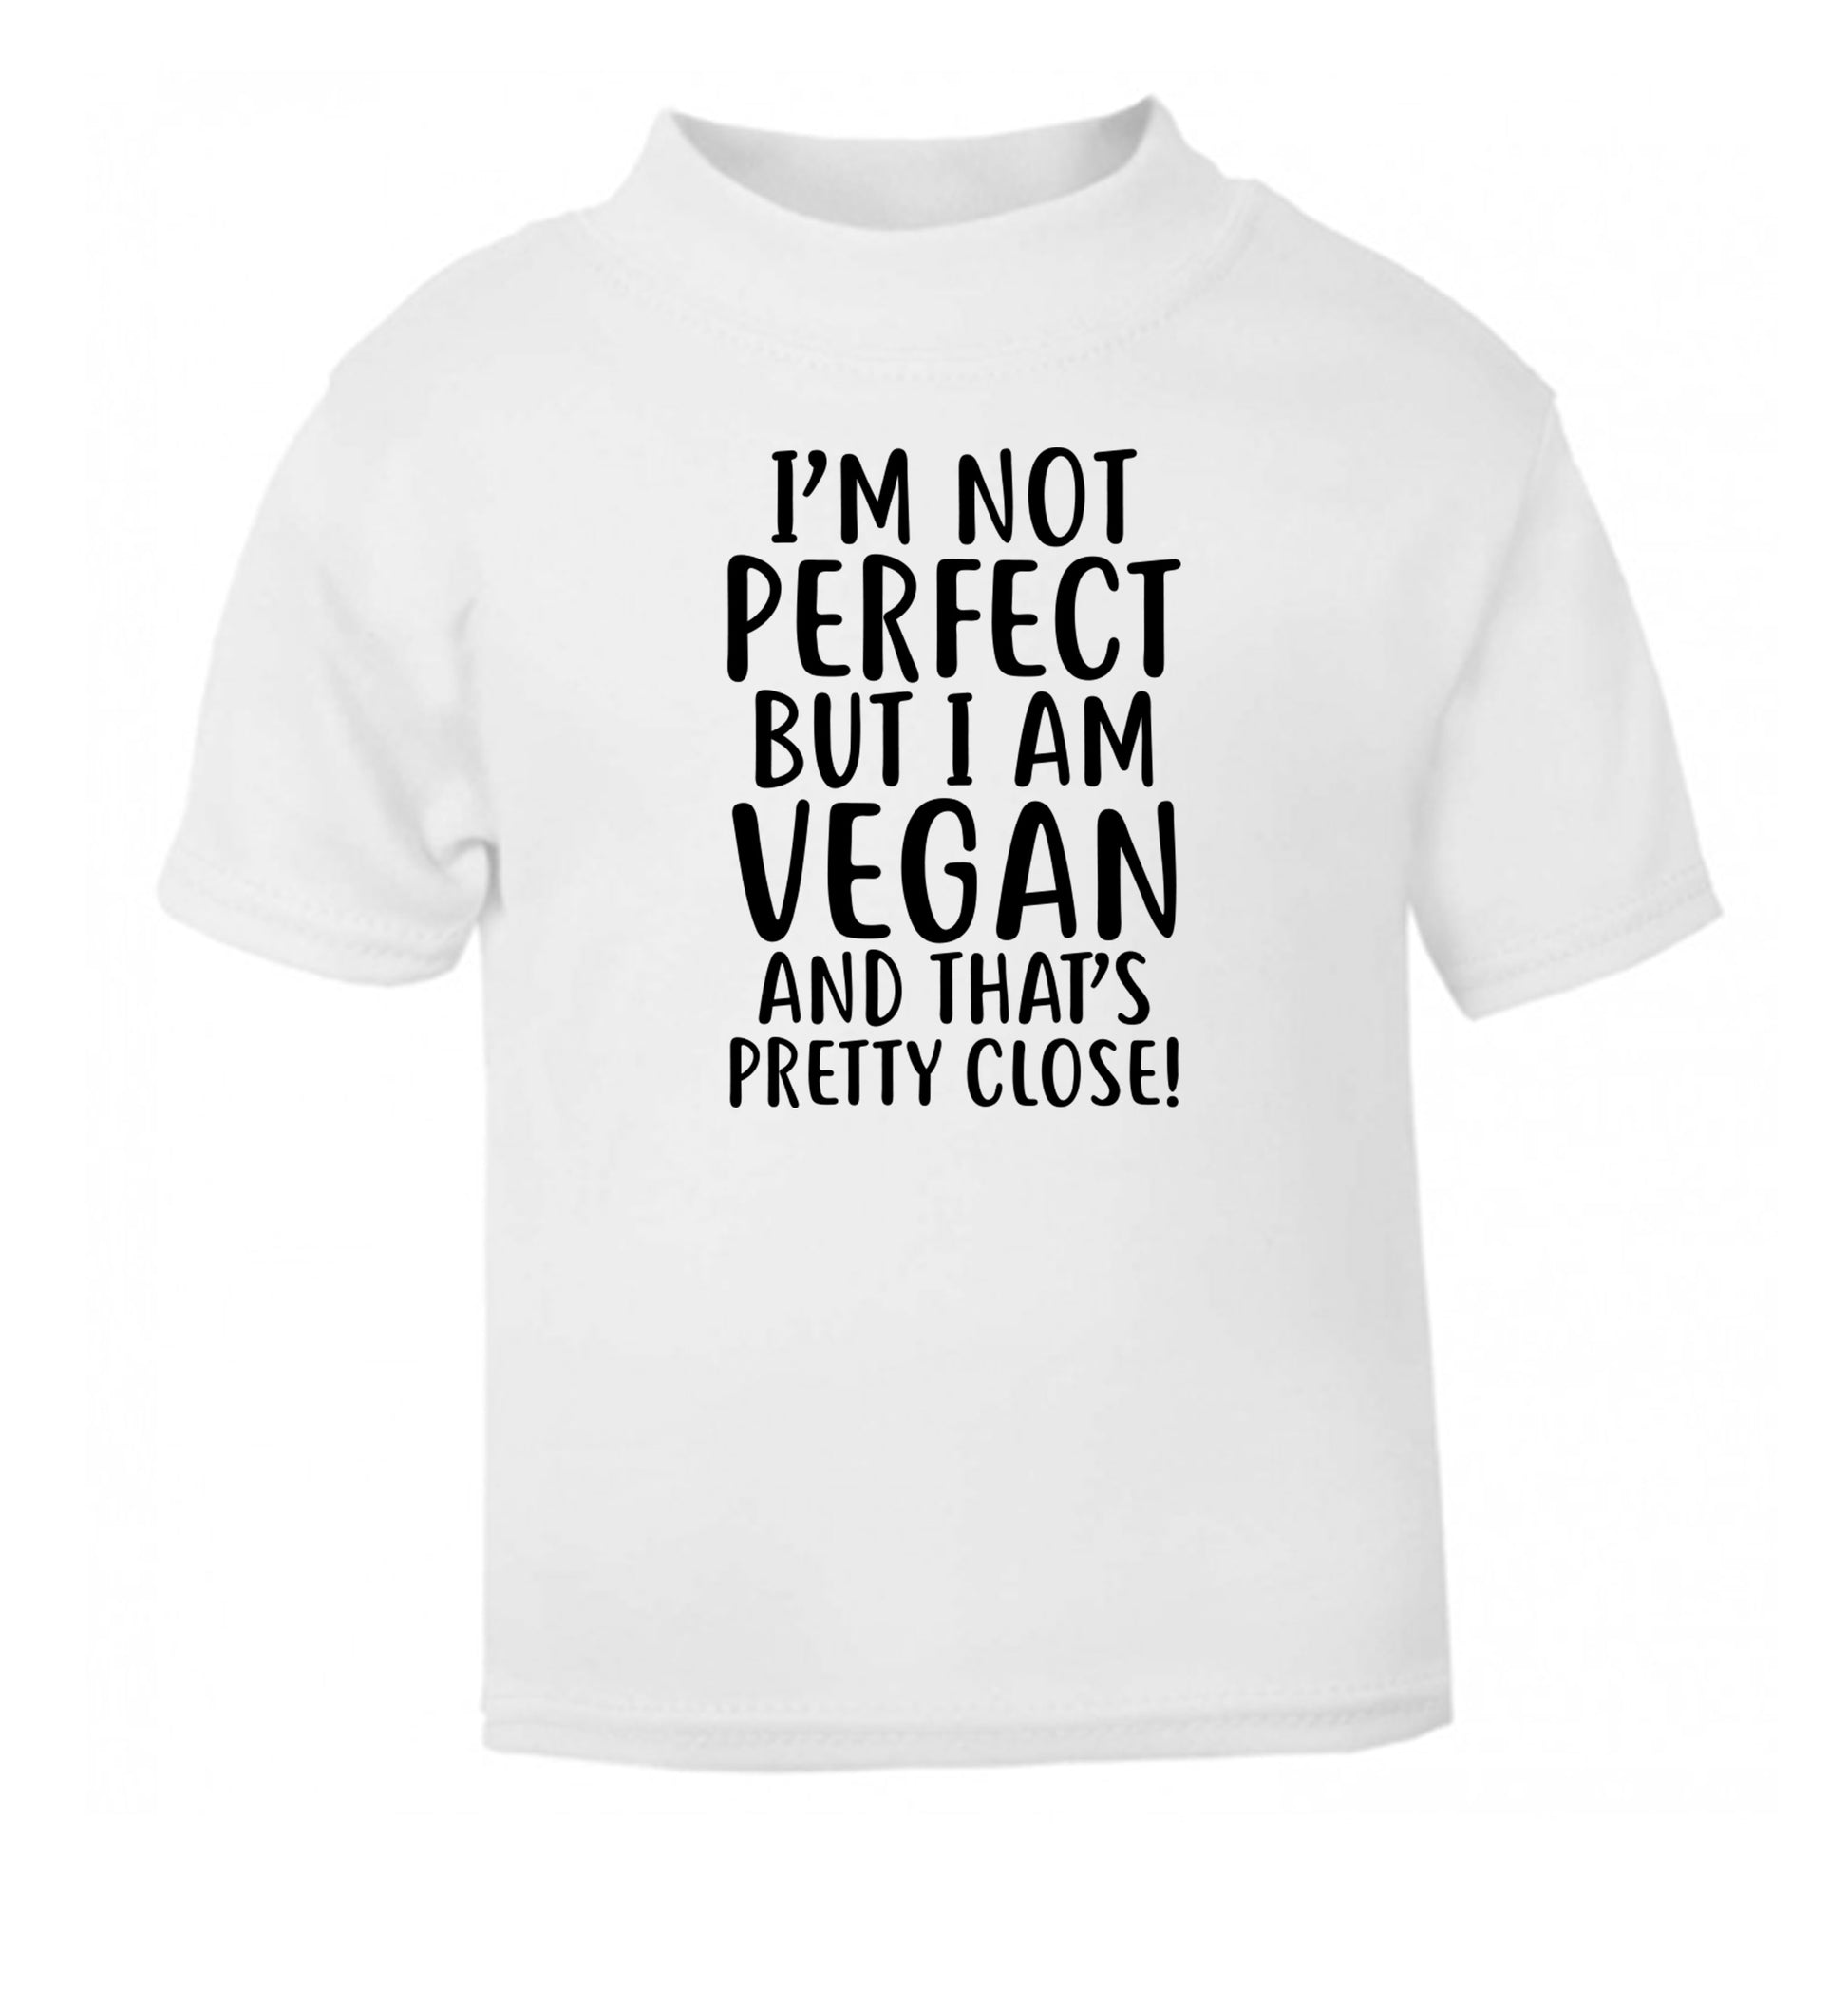 Might not be perfect but I am vegan white Baby Toddler Tshirt 2 Years